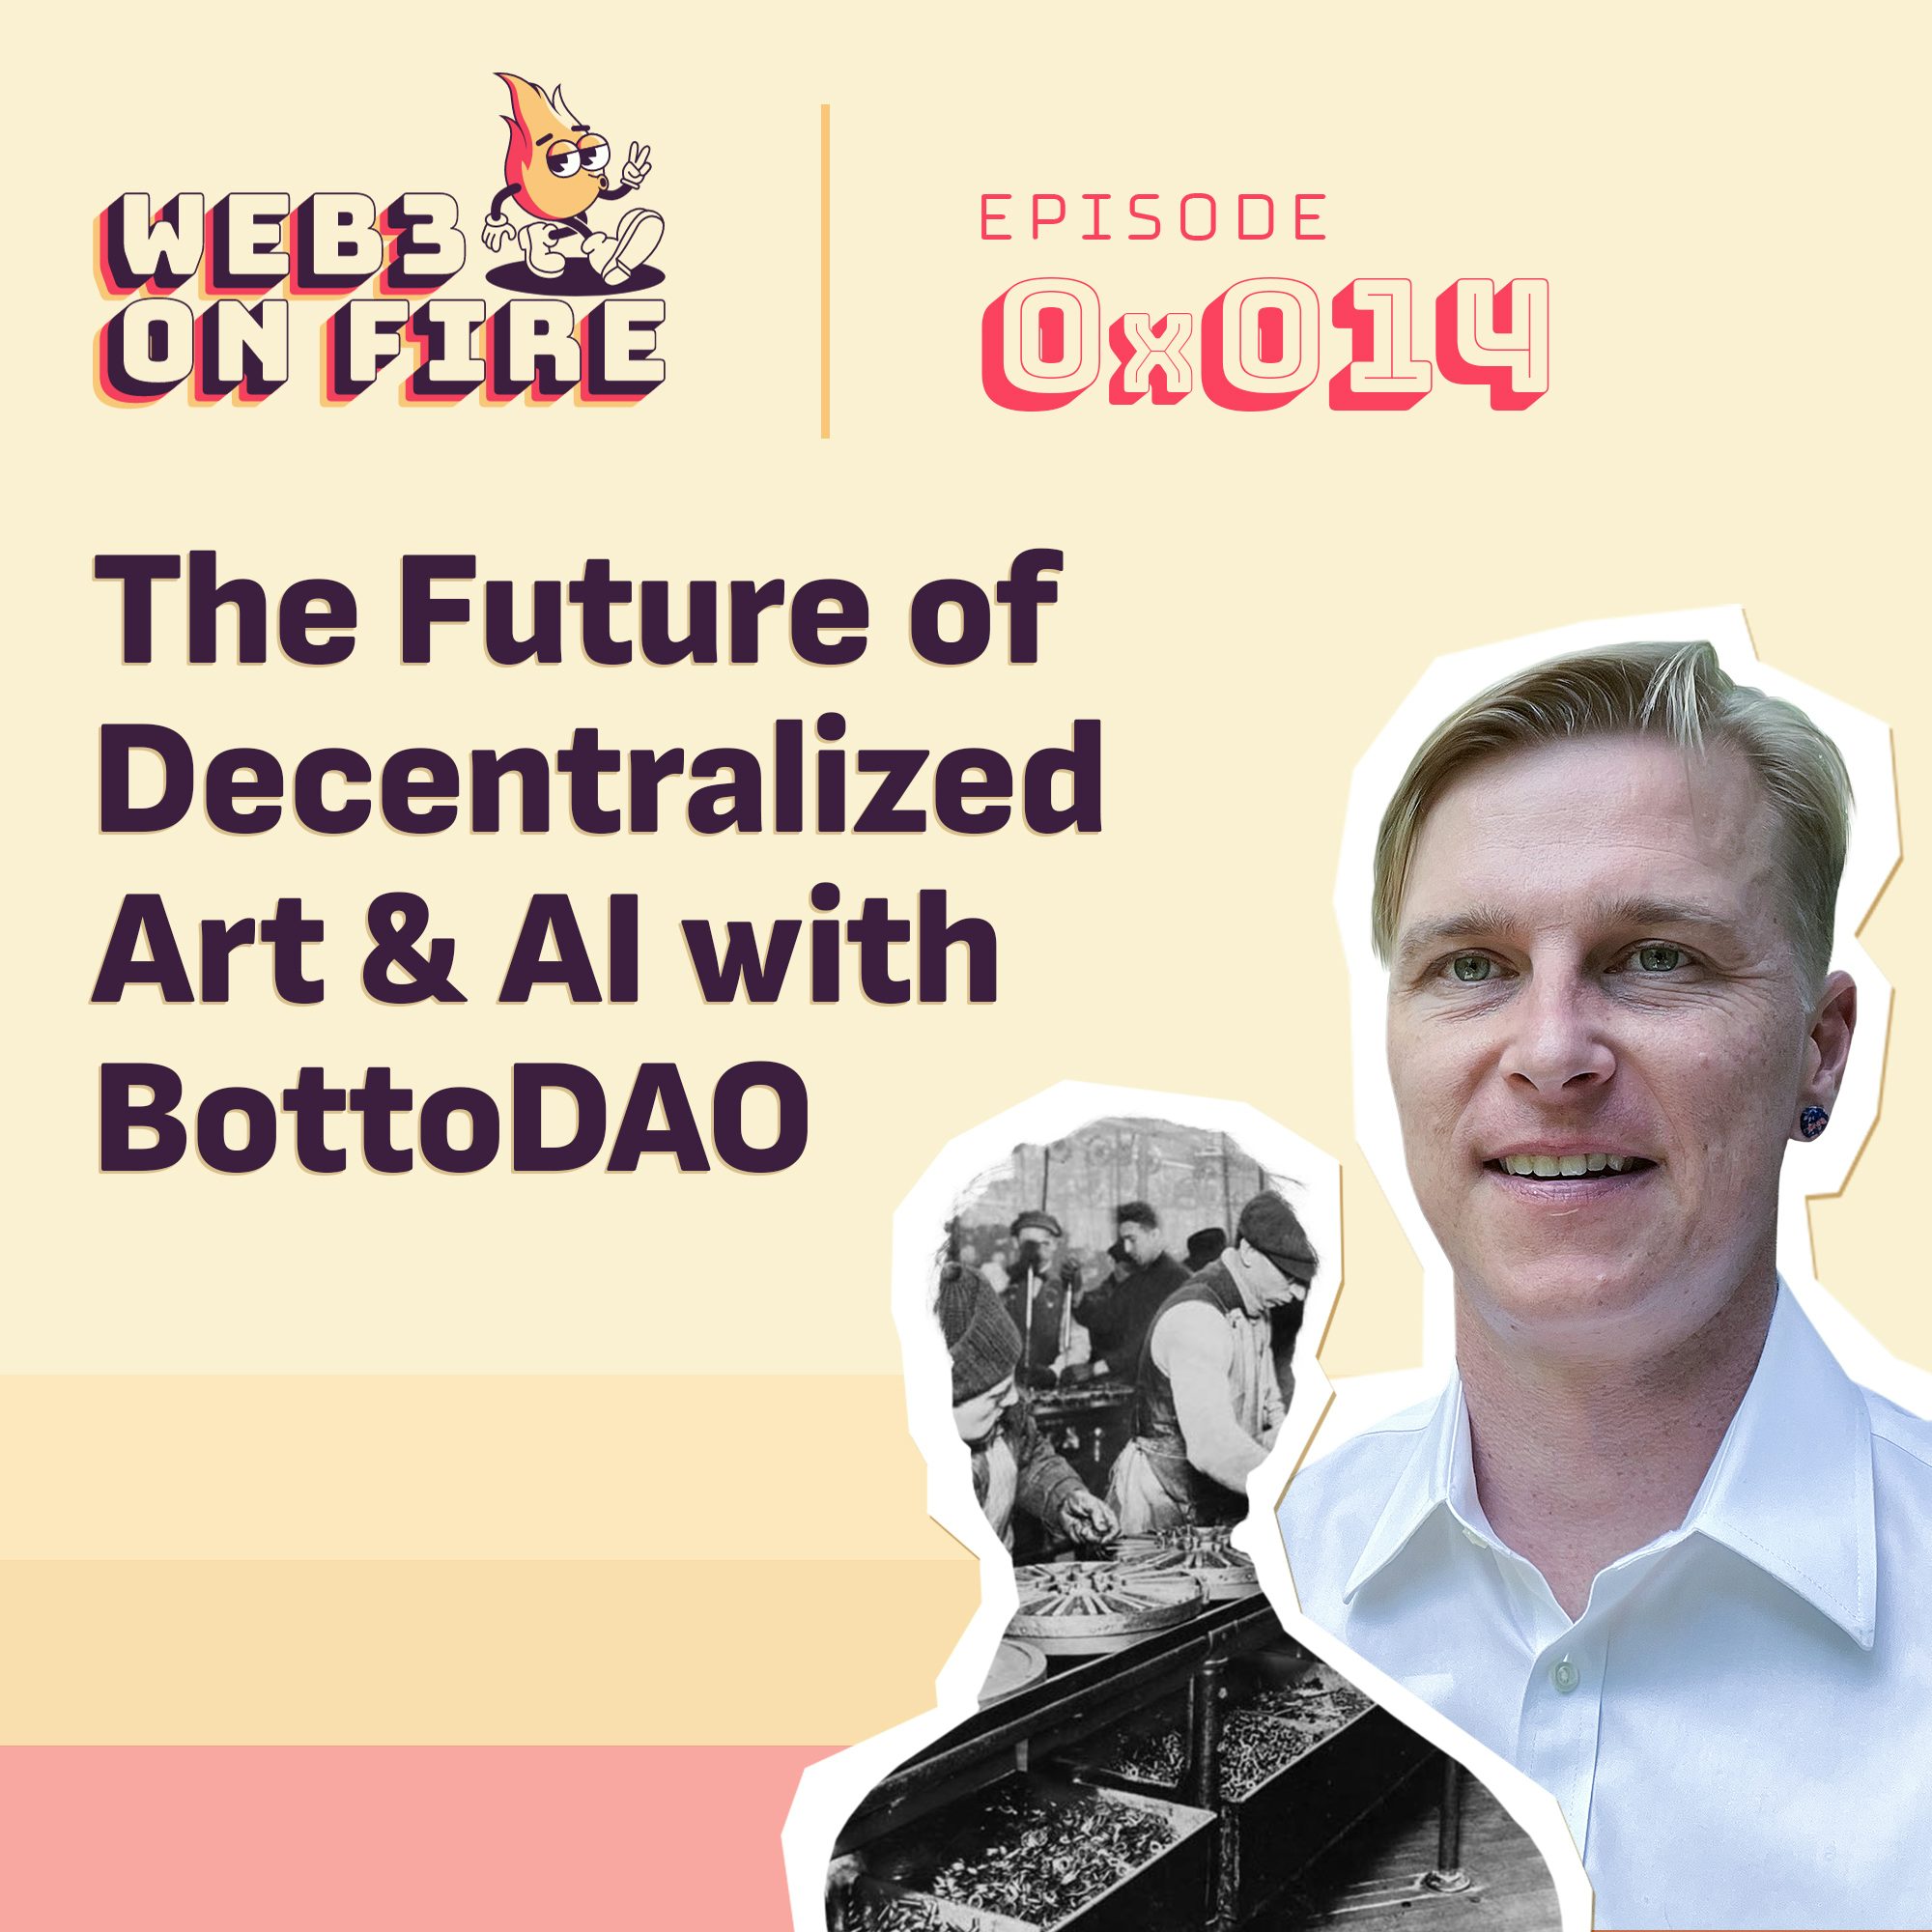 The Future of Decentralized Art & AI with BottoDAO coverart